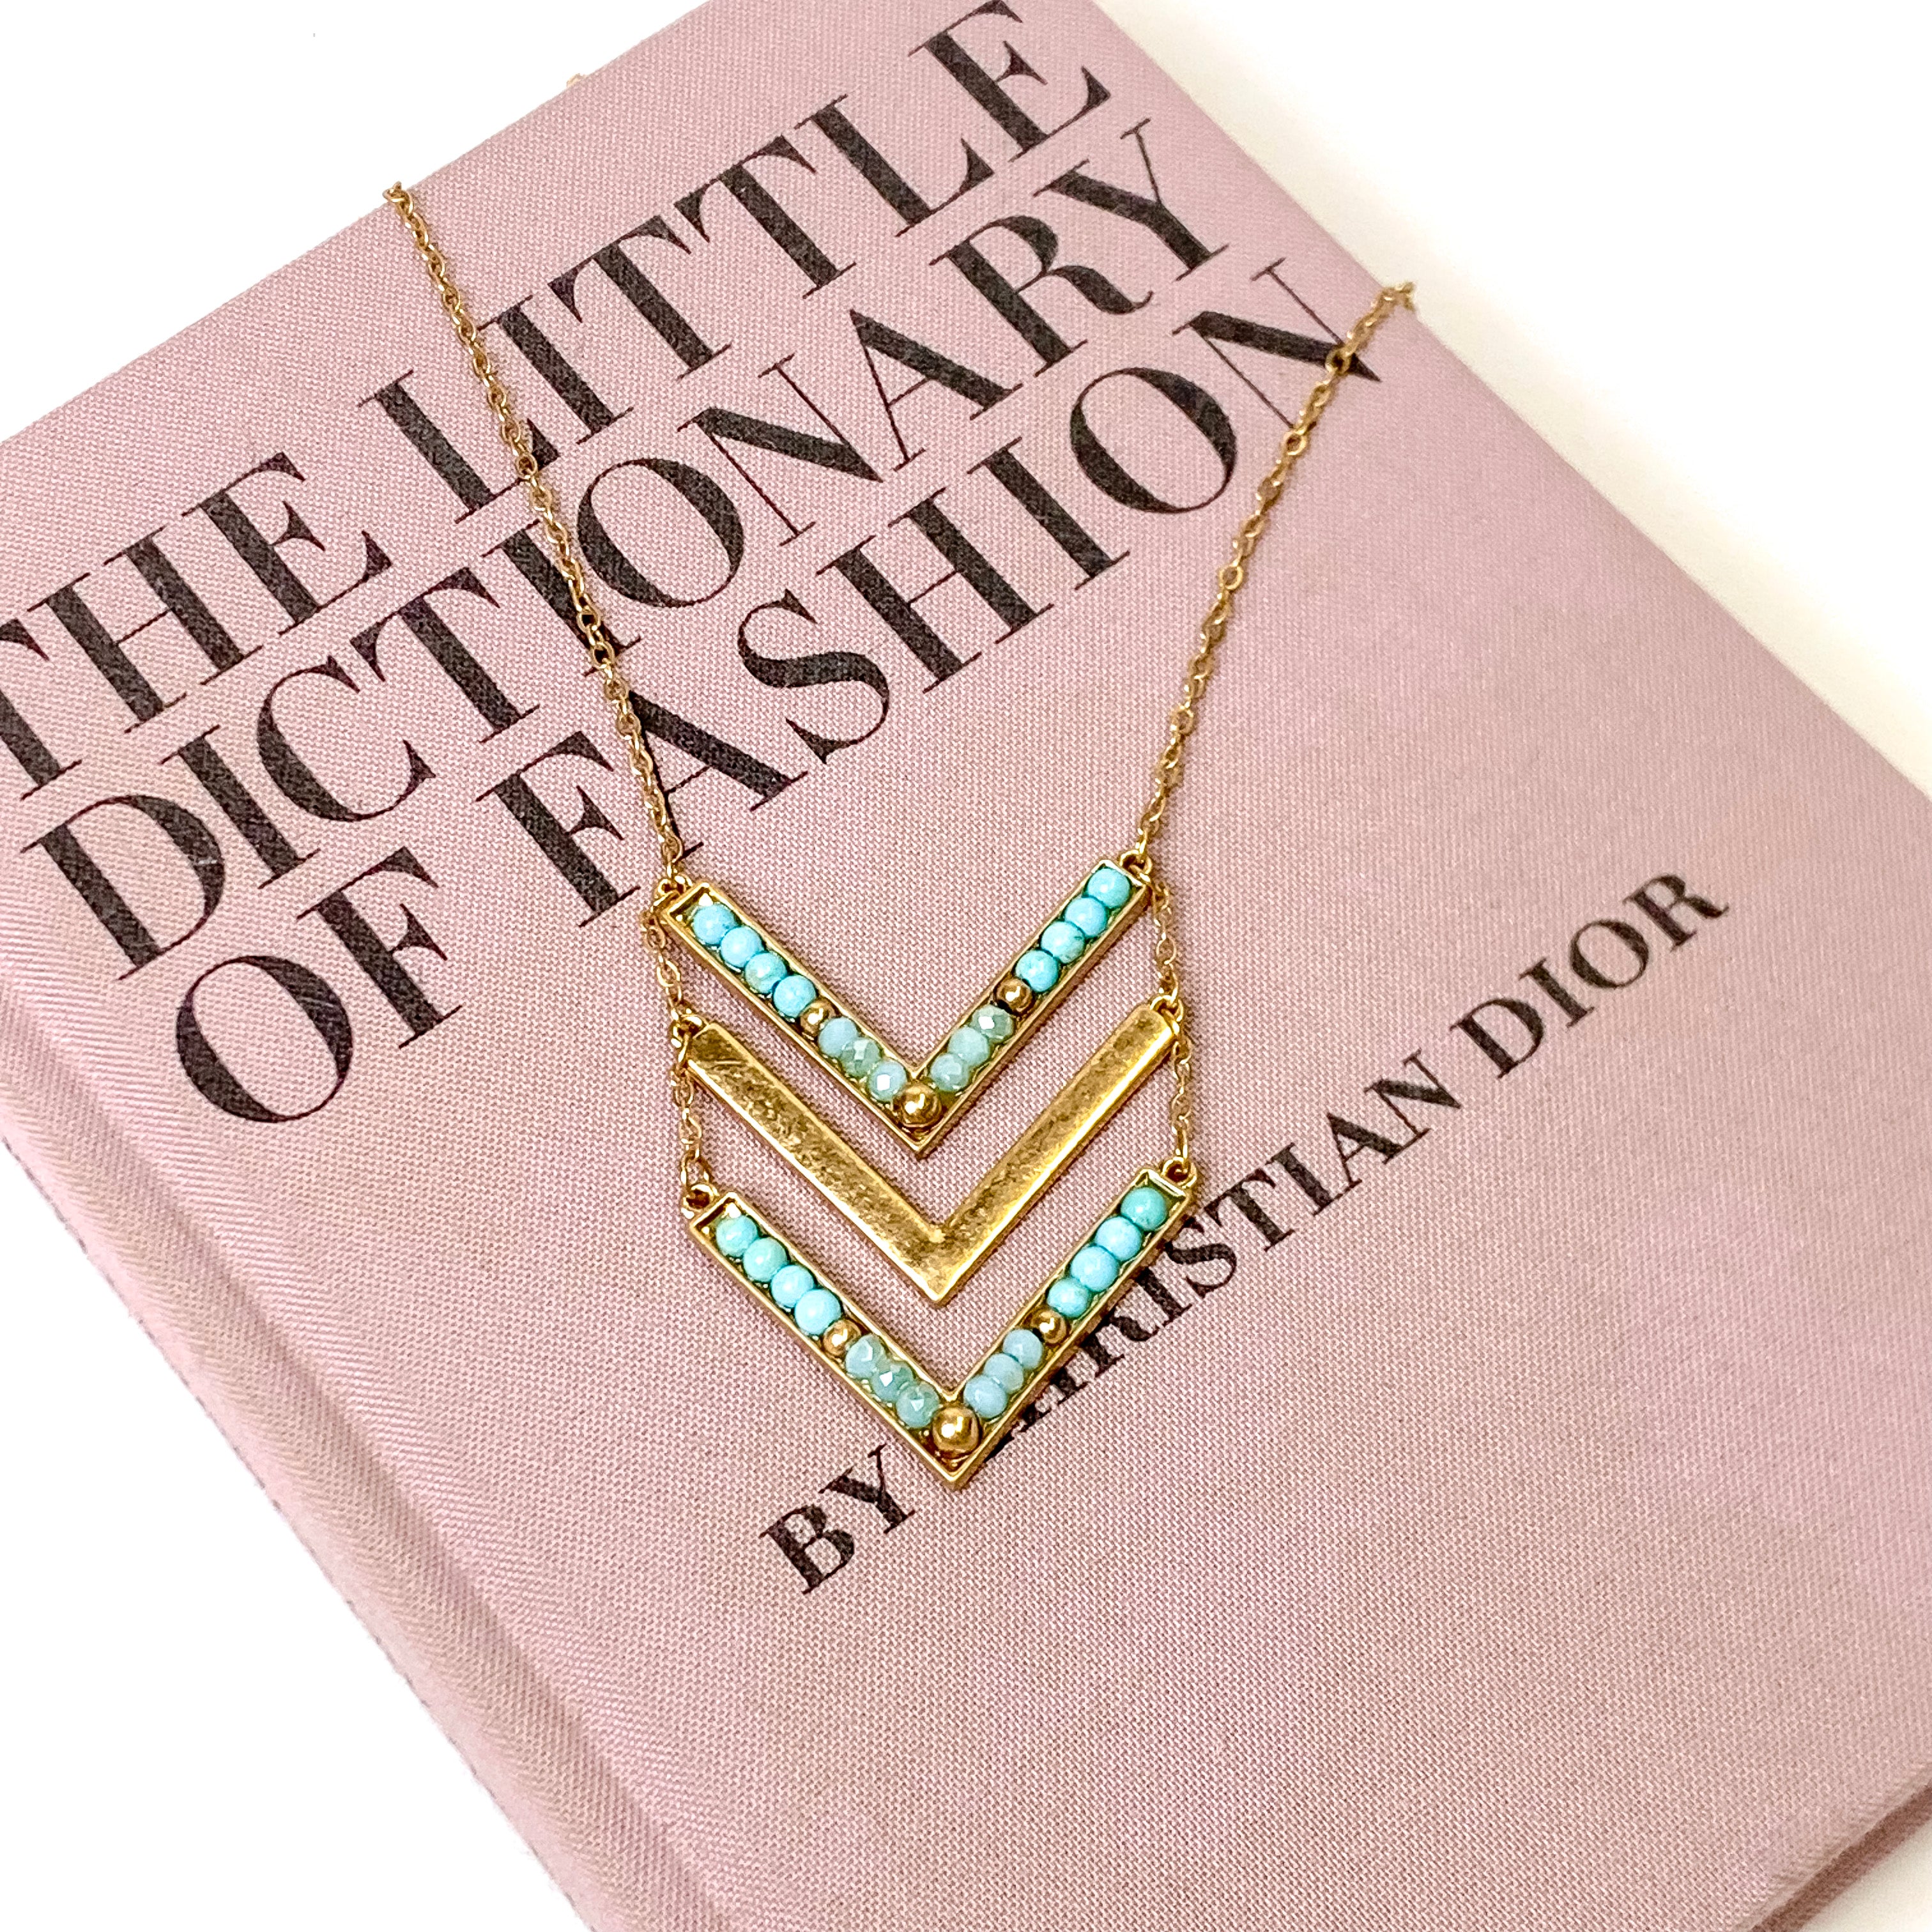 Long Gold Tone Necklace with Faux Turquoise Accented Chevron Pendant - Giddy Up Glamour Boutique